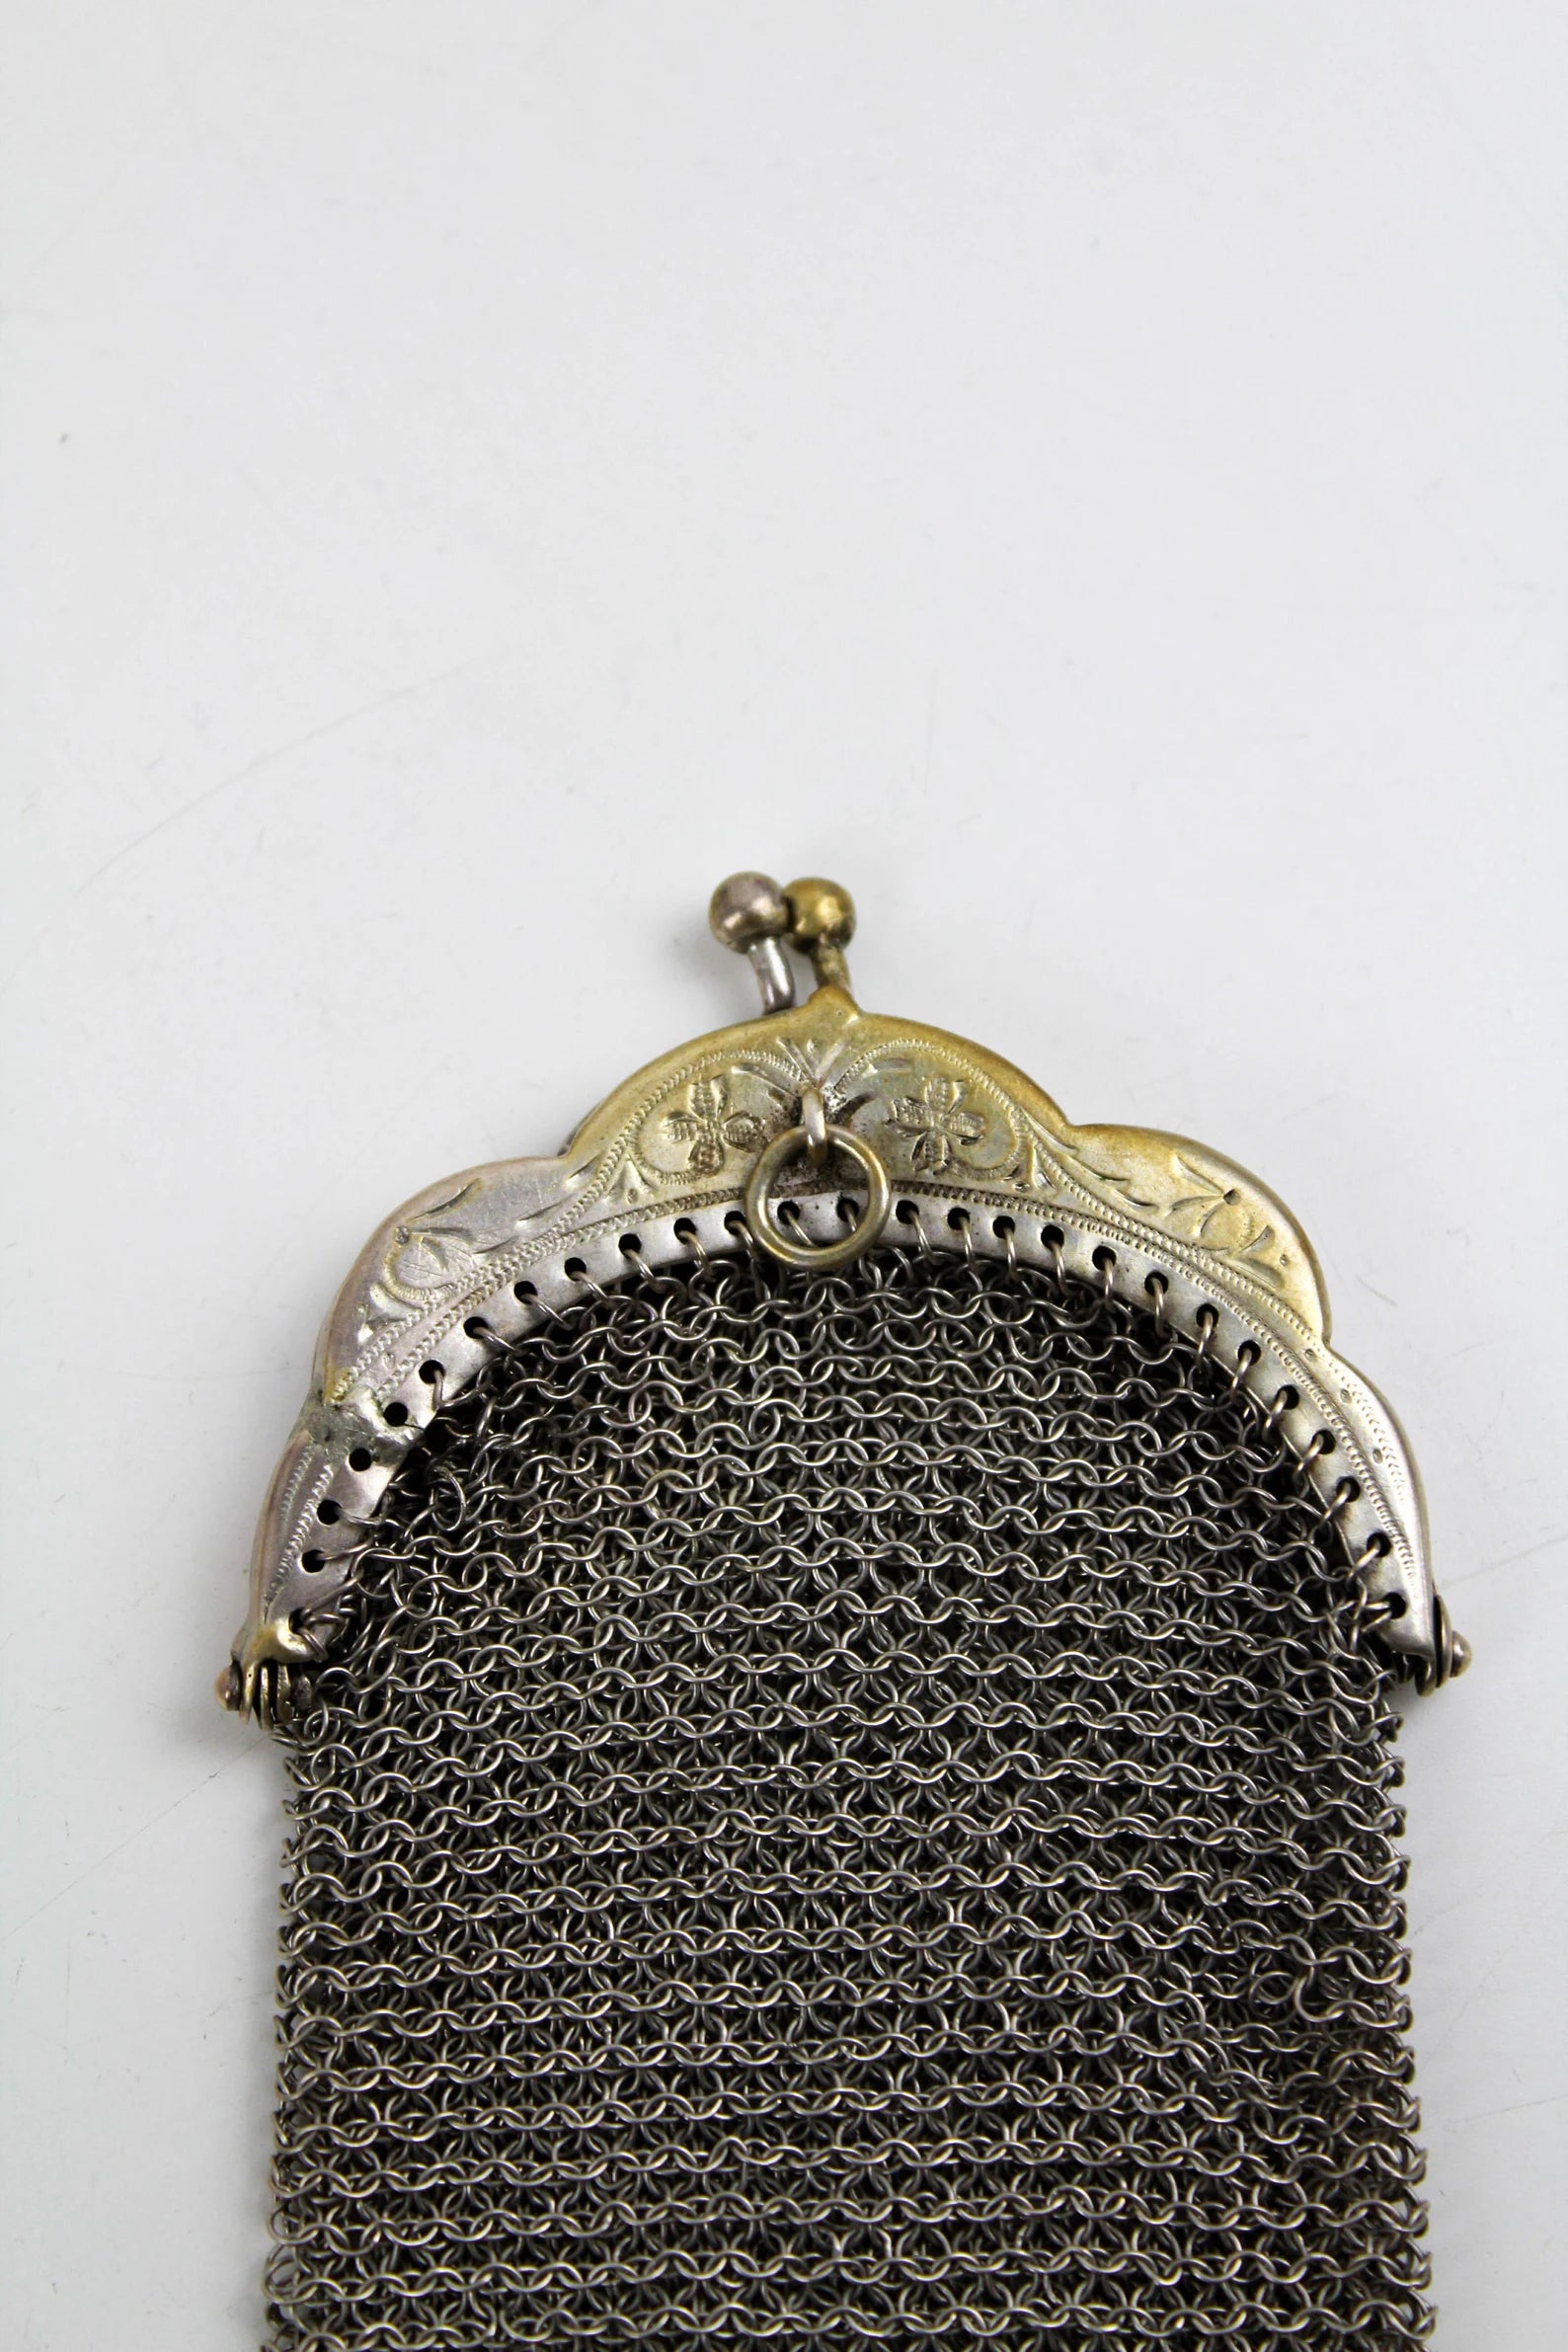 Antique Sterling Silver Coin Purse On Chain, Multiple Compartments -  Harrington & Co.